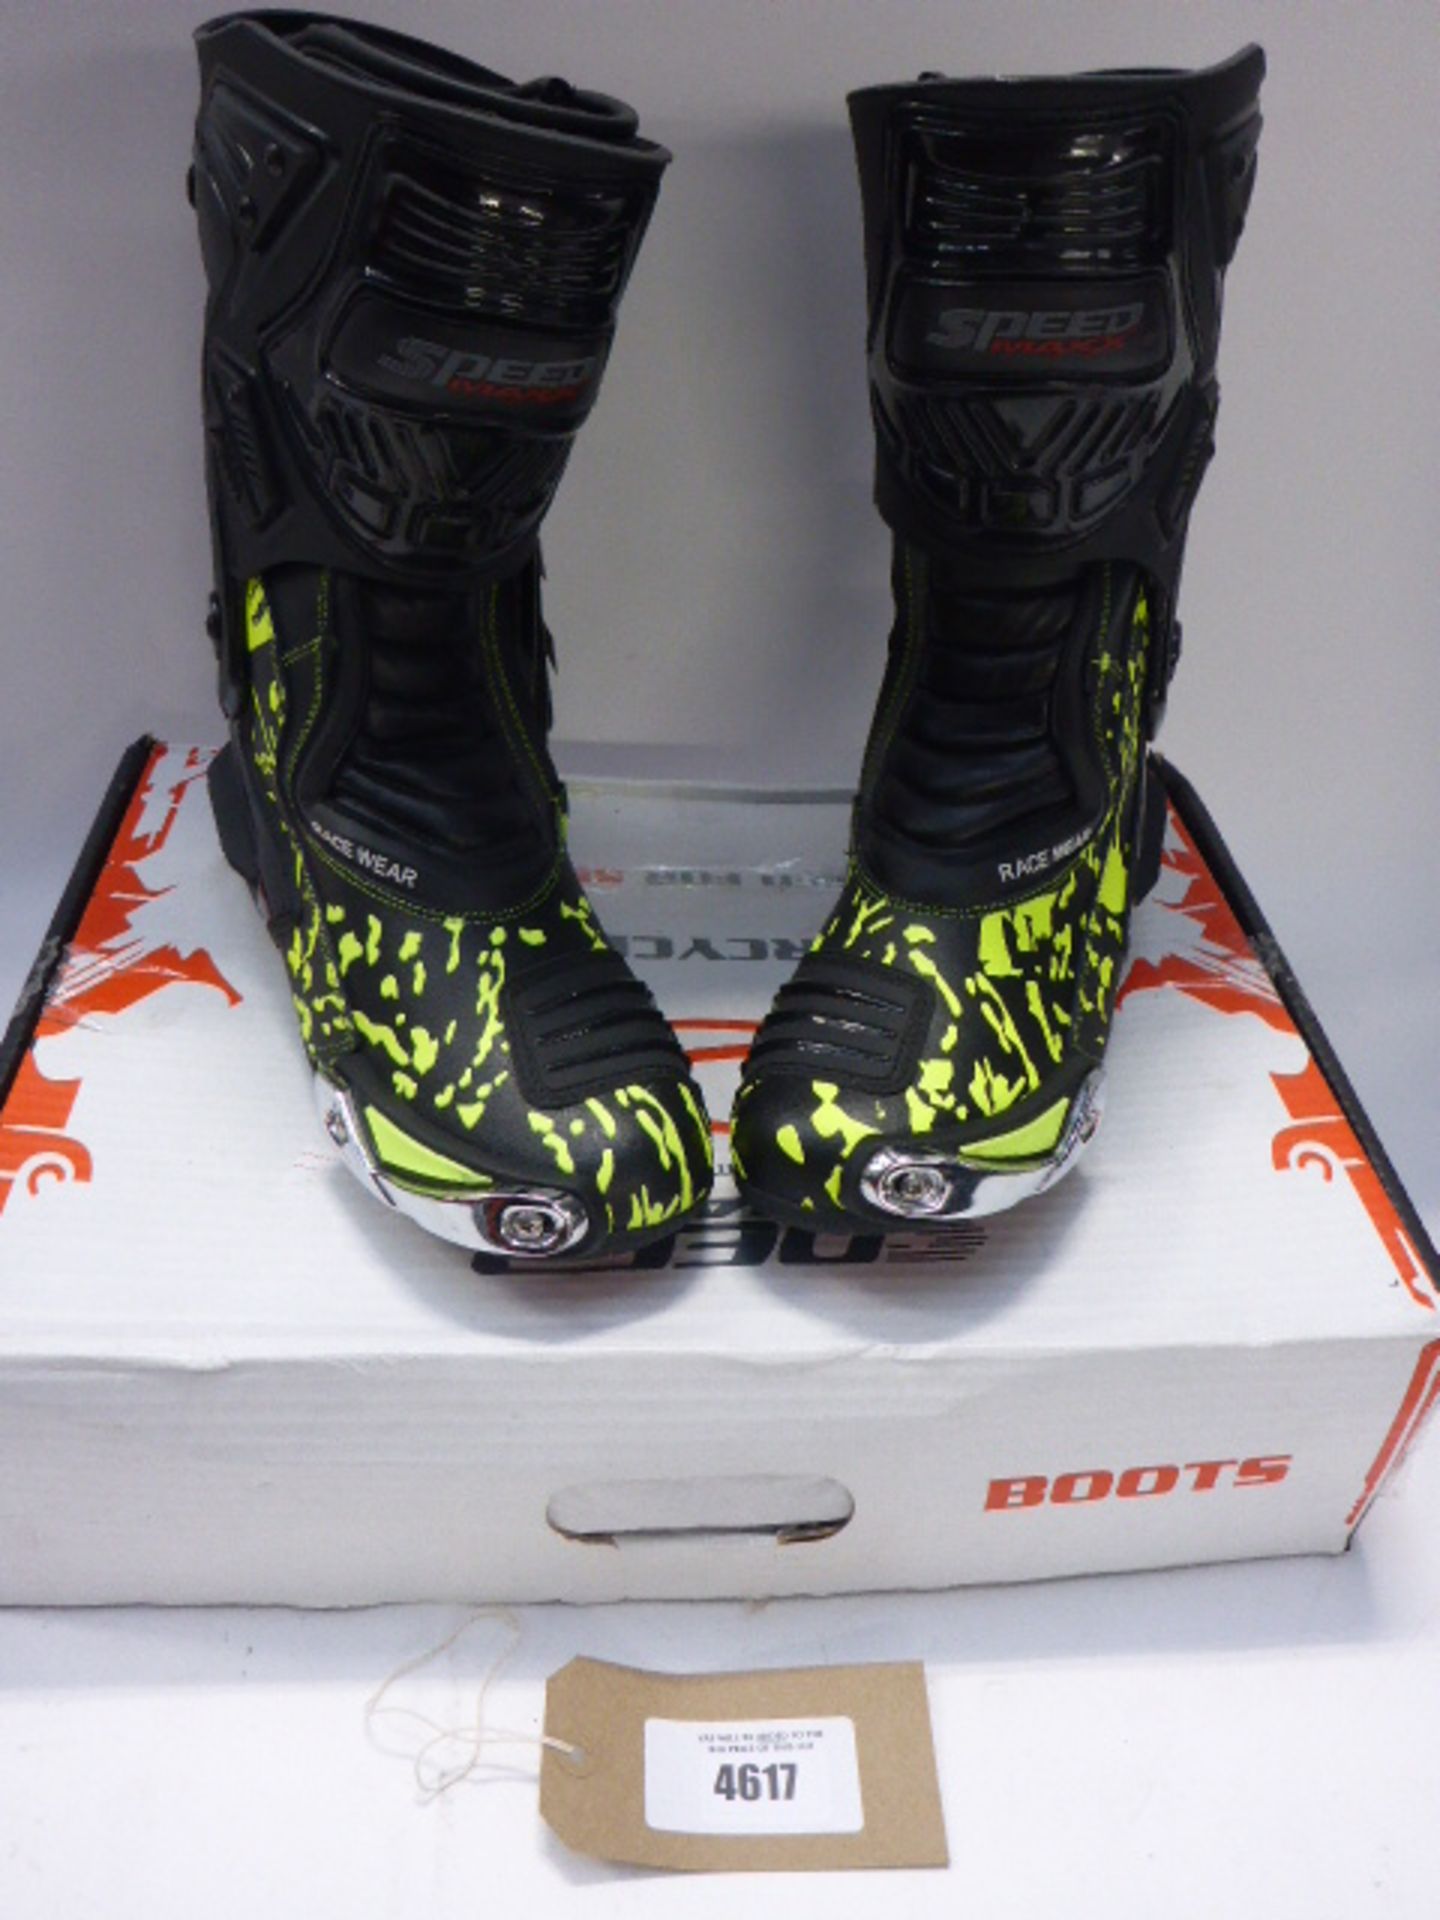 Pair of speed max race wear motorcycle boots size 10